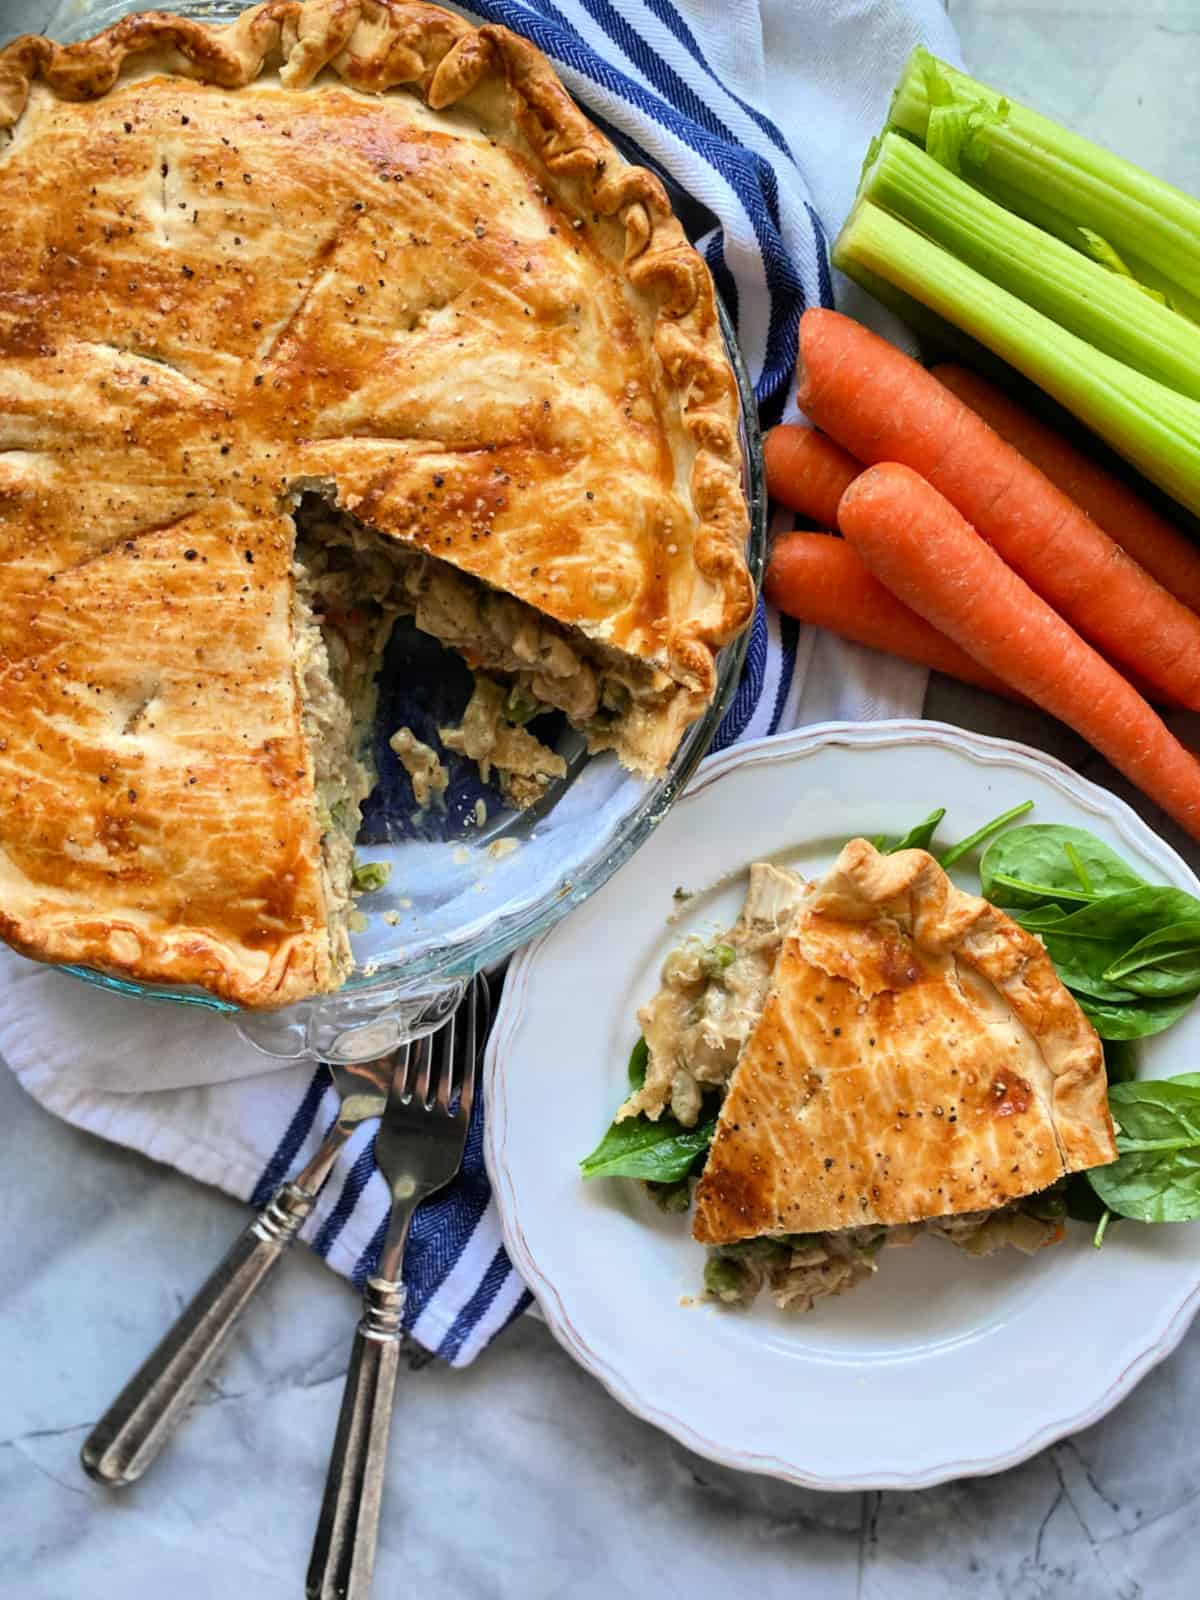 Golden brown baked pie with a slice missing--slice on top of a bed of spinach on a white plate with vegetables next to the pie.